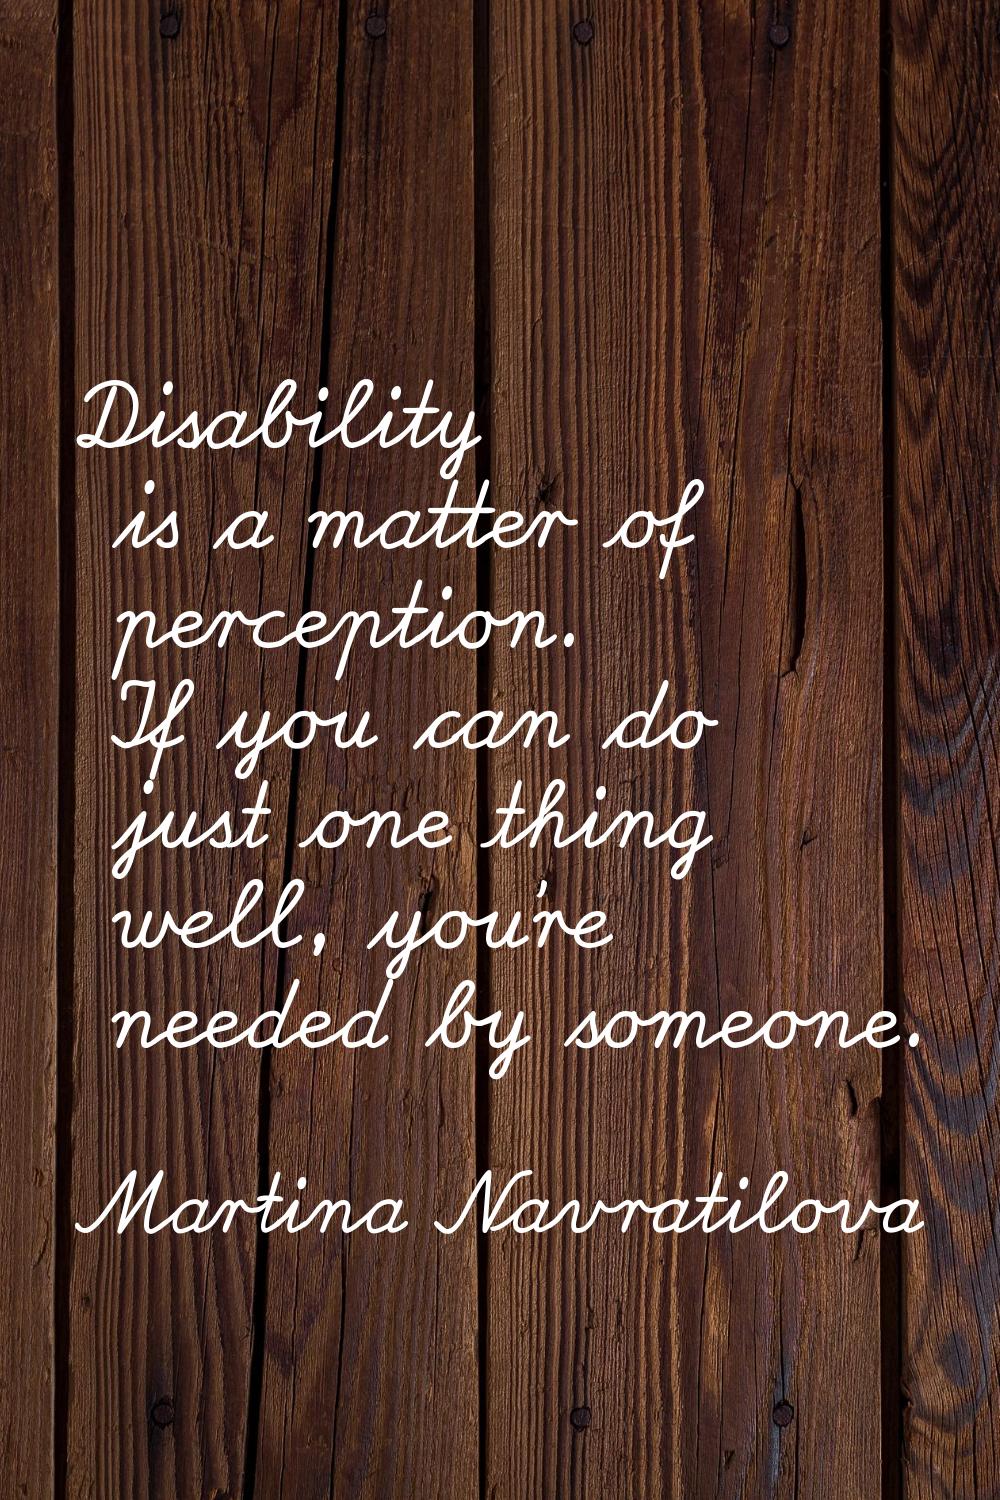 Disability is a matter of perception. If you can do just one thing well, you're needed by someone.